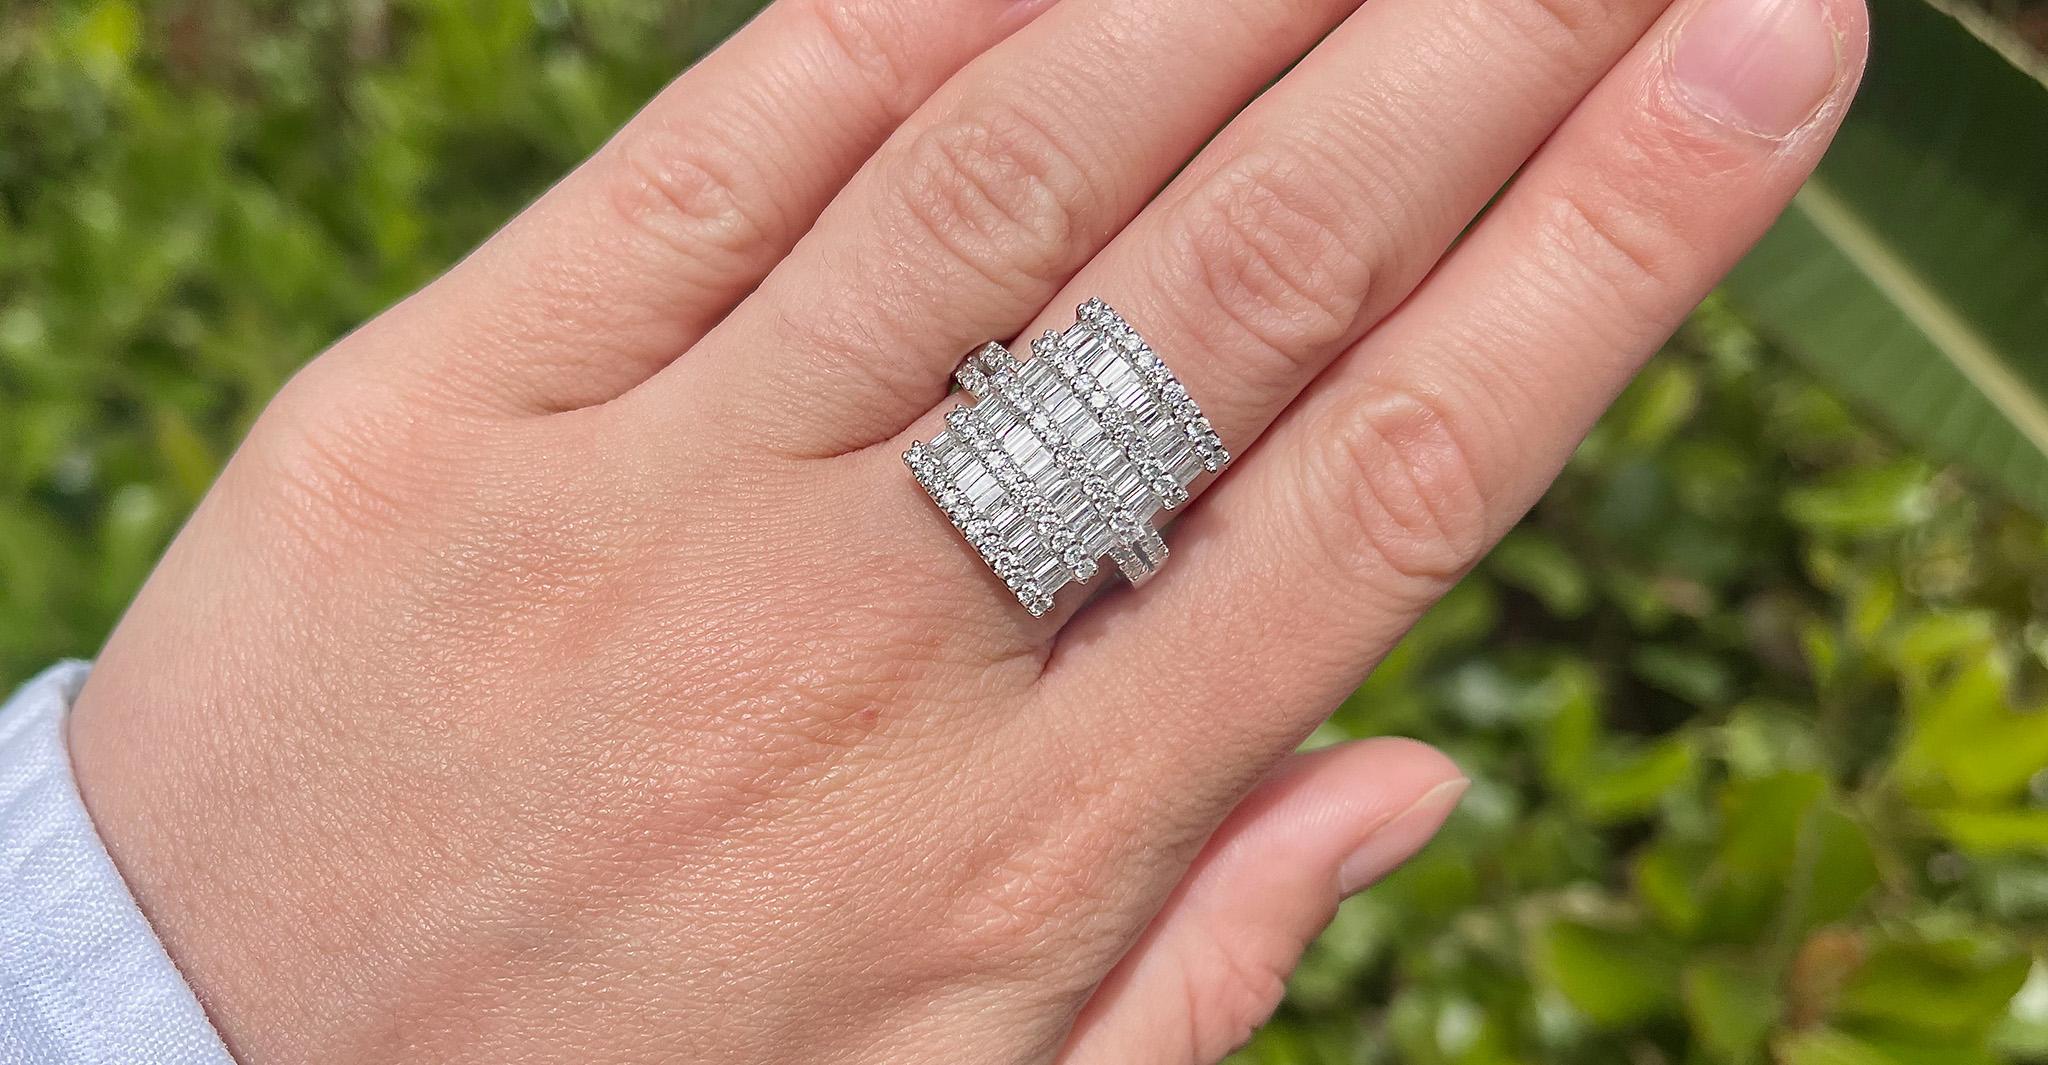 Diamonds = 3 Carats
Cut: Baguette and Round 
(Color: F, Clarity: VS)
Metal: 18K White Gold
Made in Italy
Ring Size = 8* US
*It can be resized complimentary